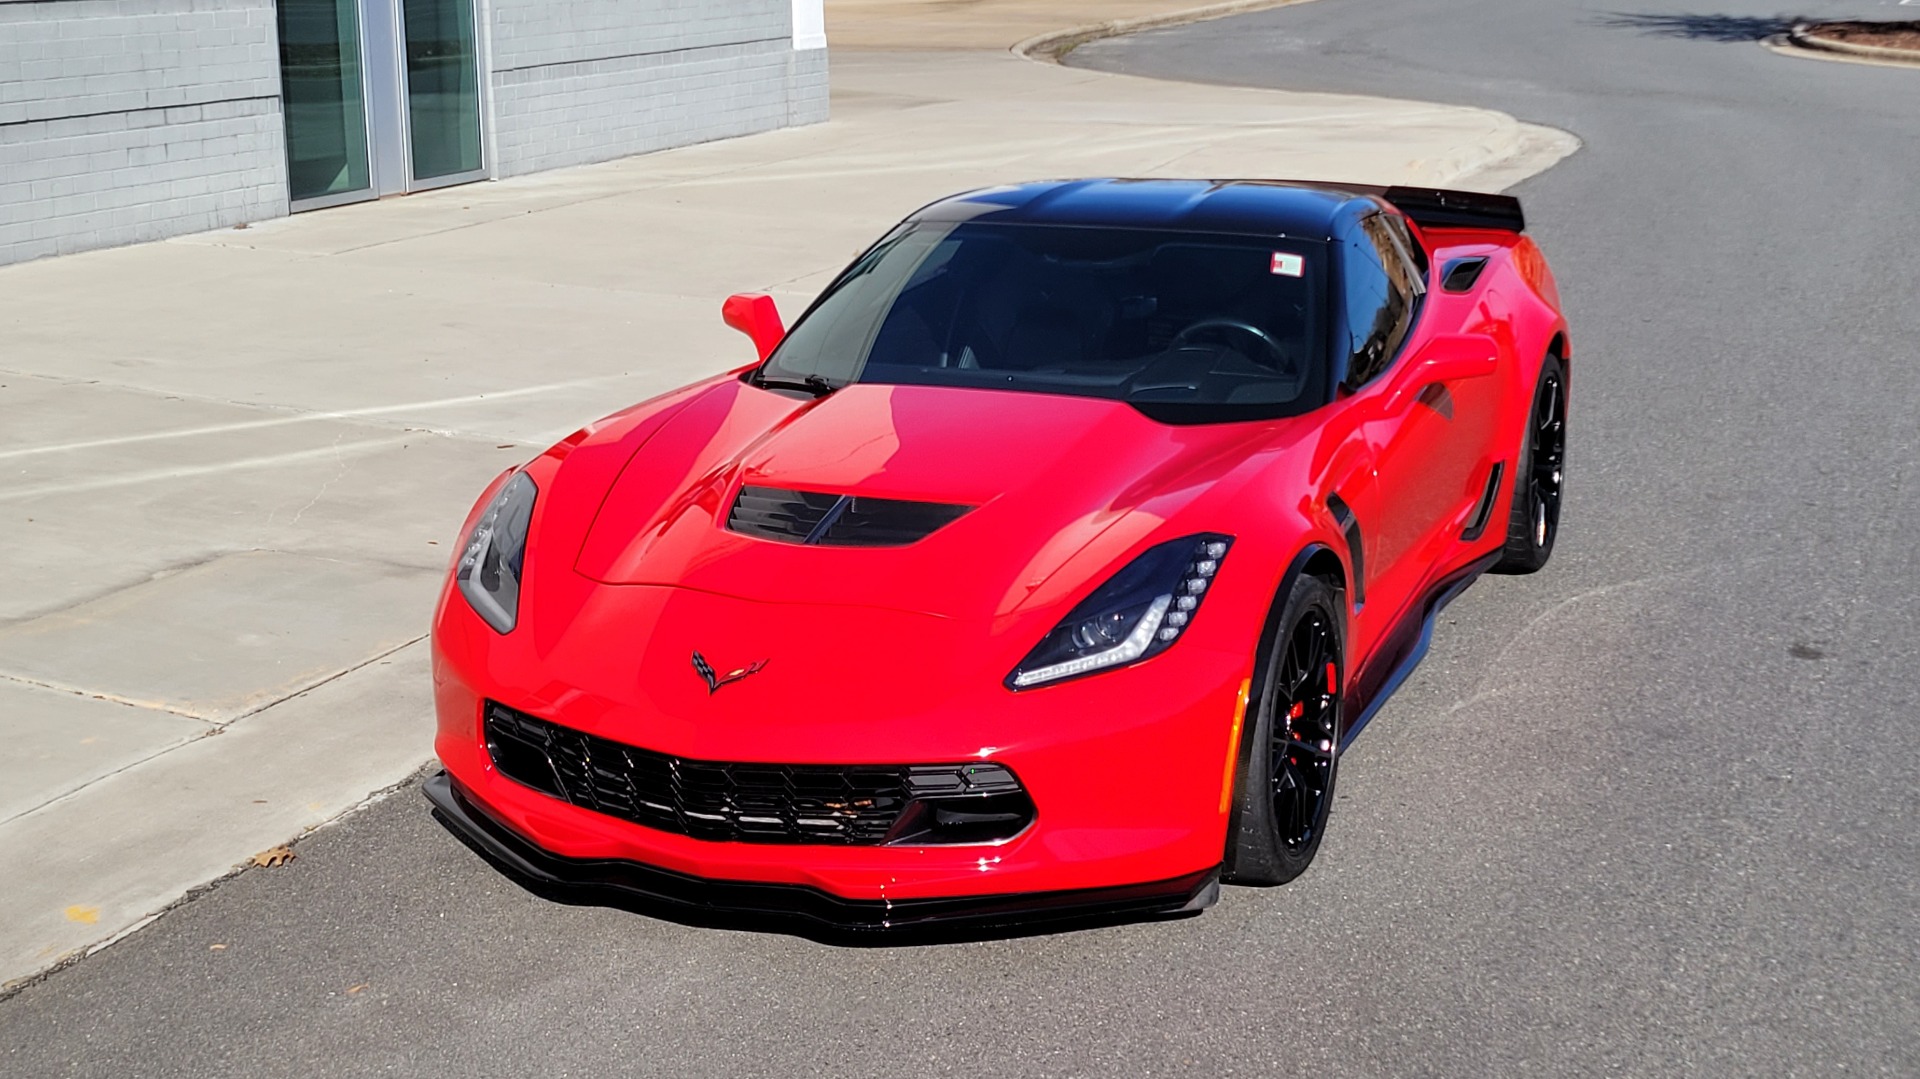 Used 2015 Chevrolet CORVETTE Z06 COUPE 2LZ (650HP+) / NAV / BOSE / PERF DATA RECORDER / REARVIEW for sale $69,500 at Formula Imports in Charlotte NC 28227 2